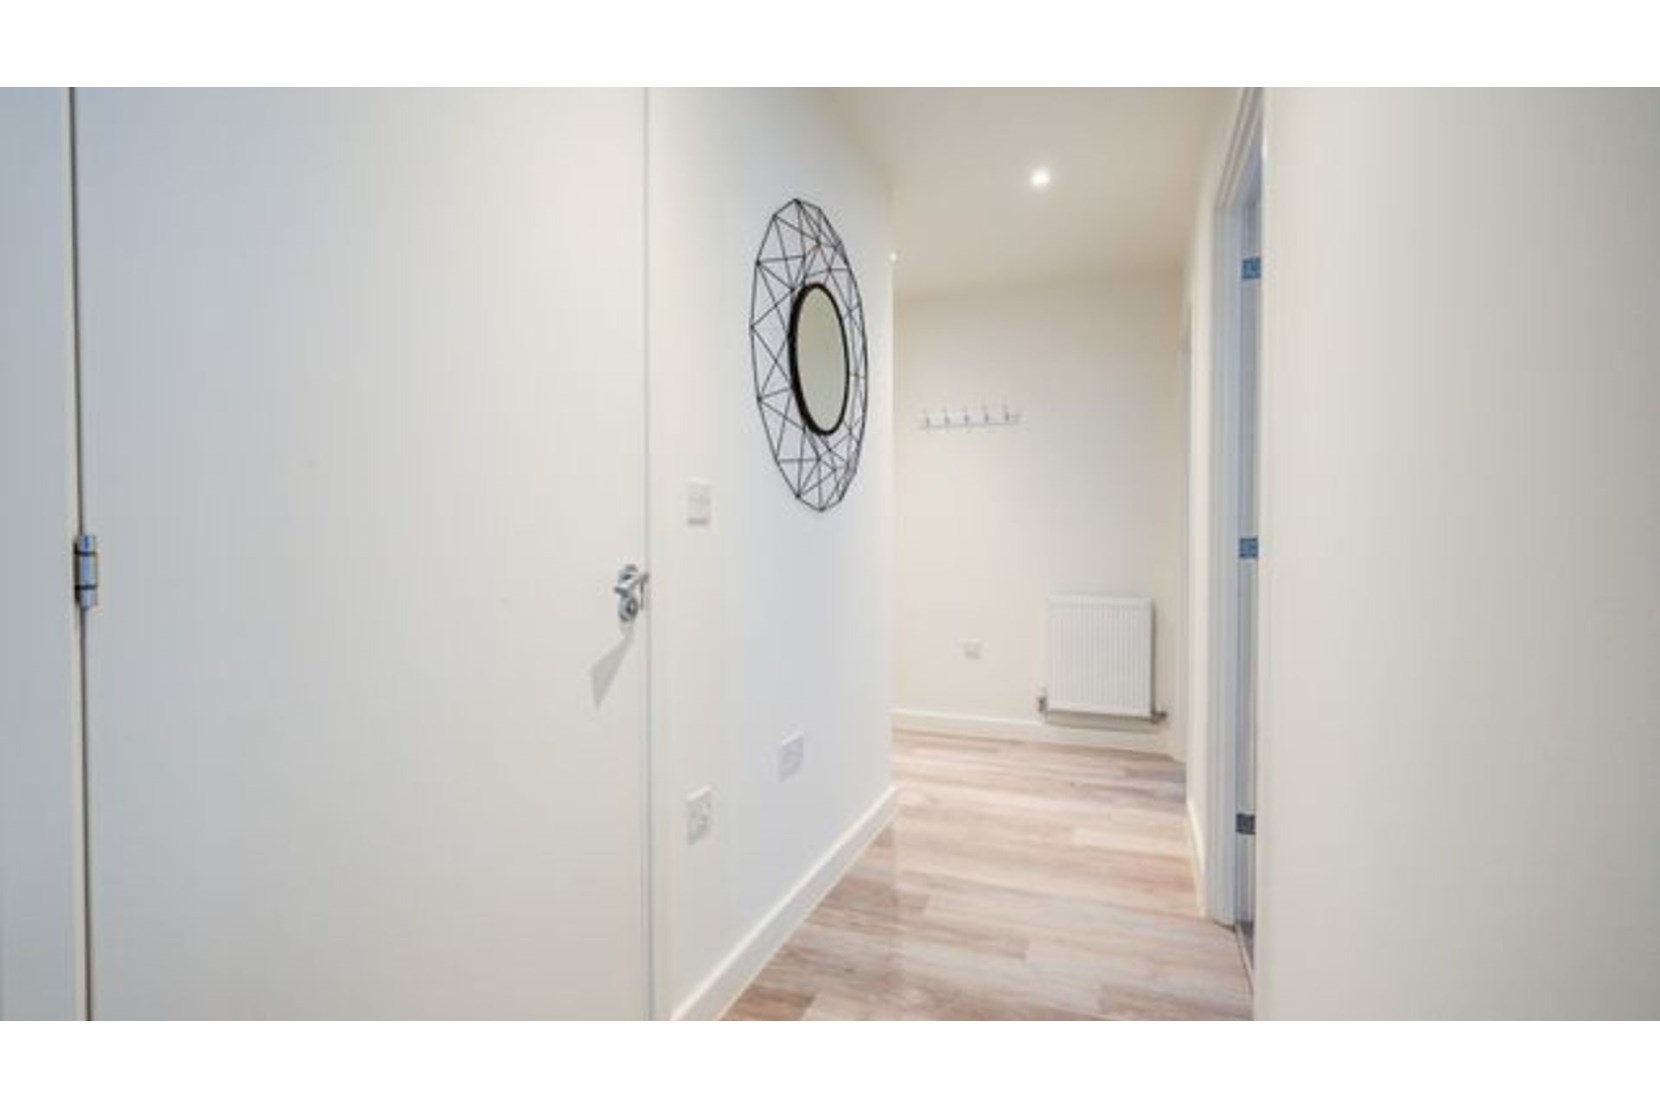 Apartments to Rent by Hera at Hornchurch, Havering, RM11, hallway